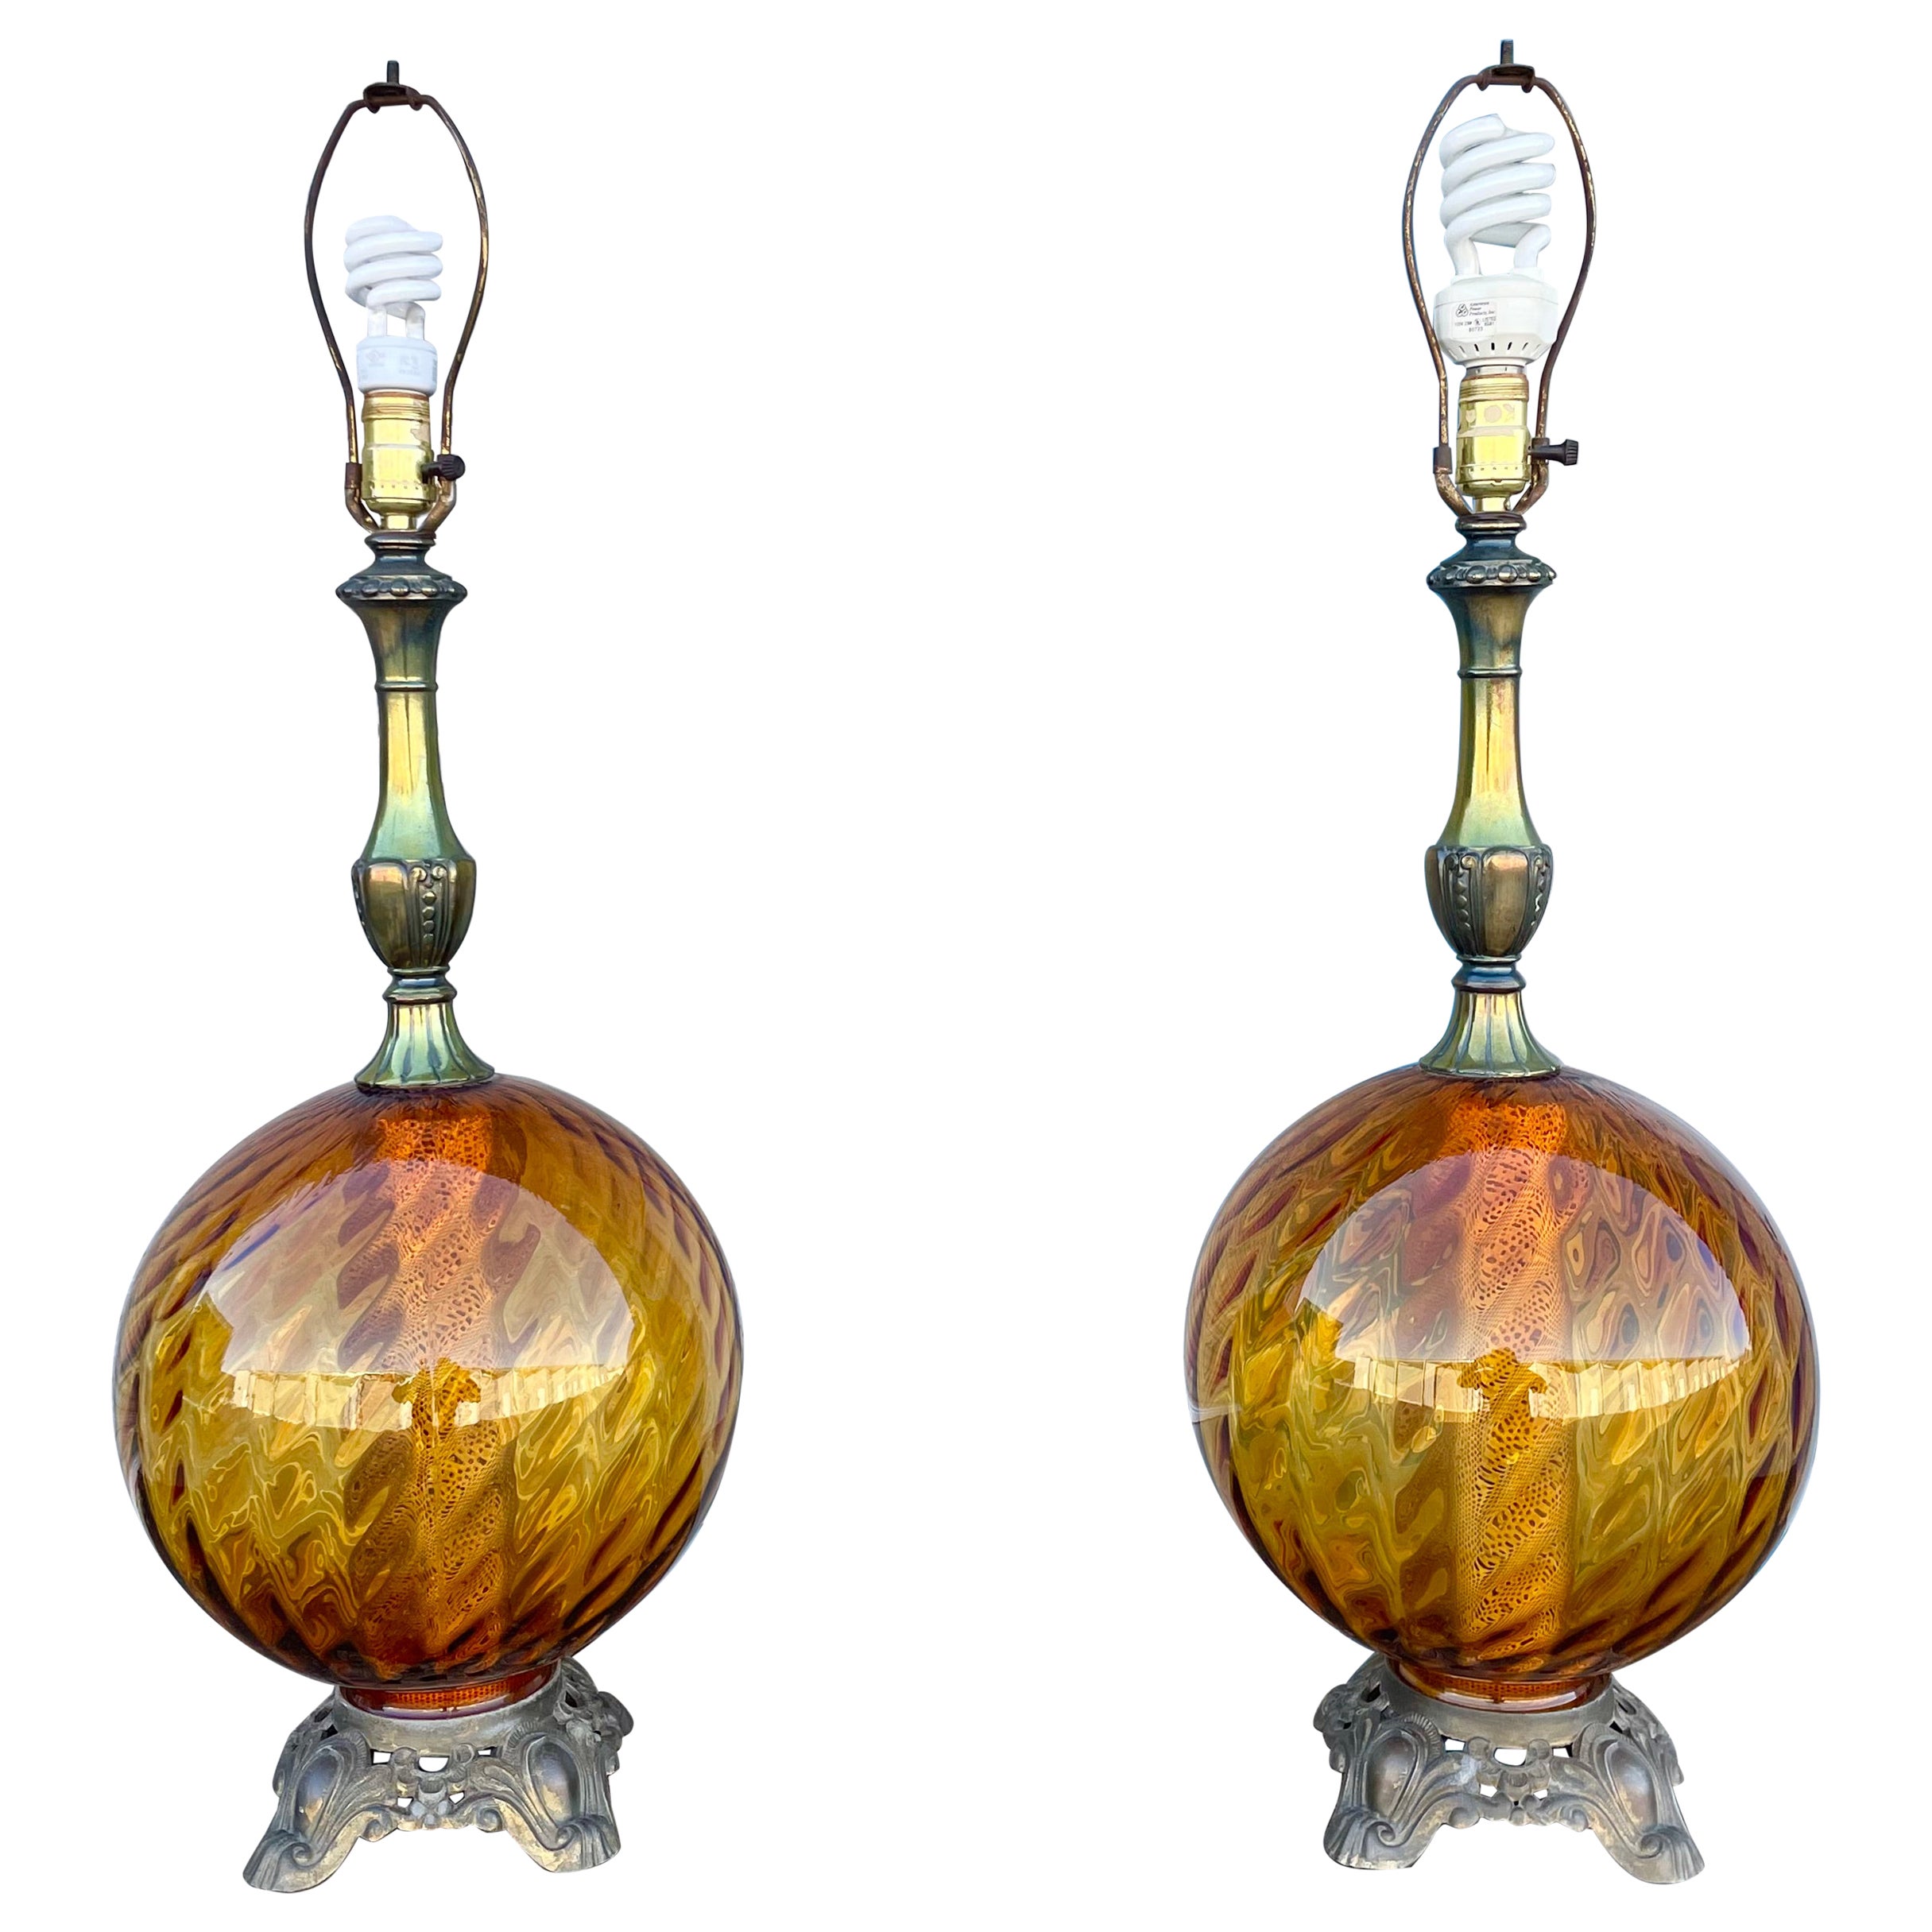 1970s Vintage Glass Sphere Lamps - a Pair